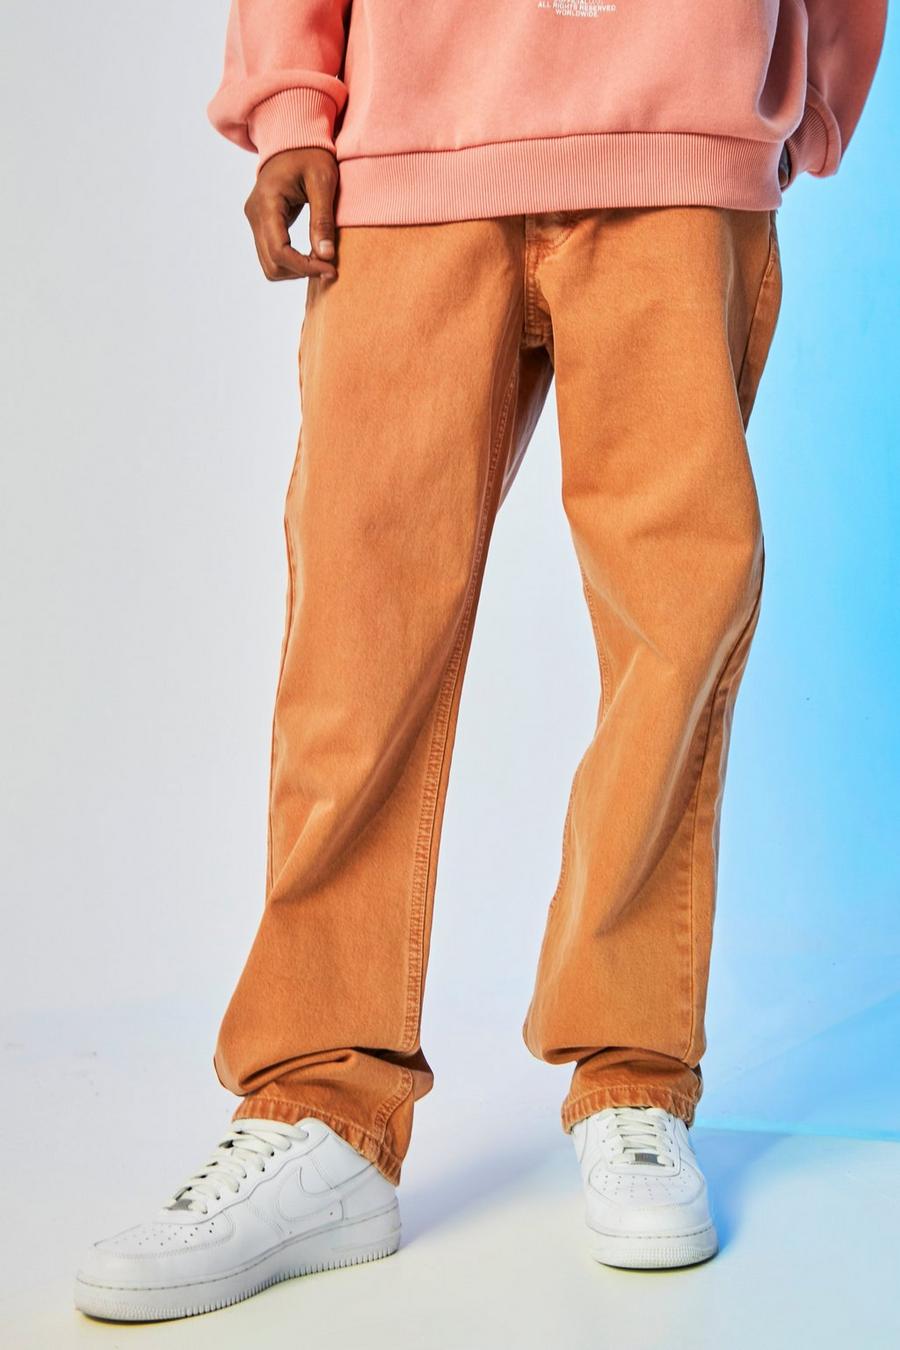 Brown Relaxed Fit Rigid Washed Jeans